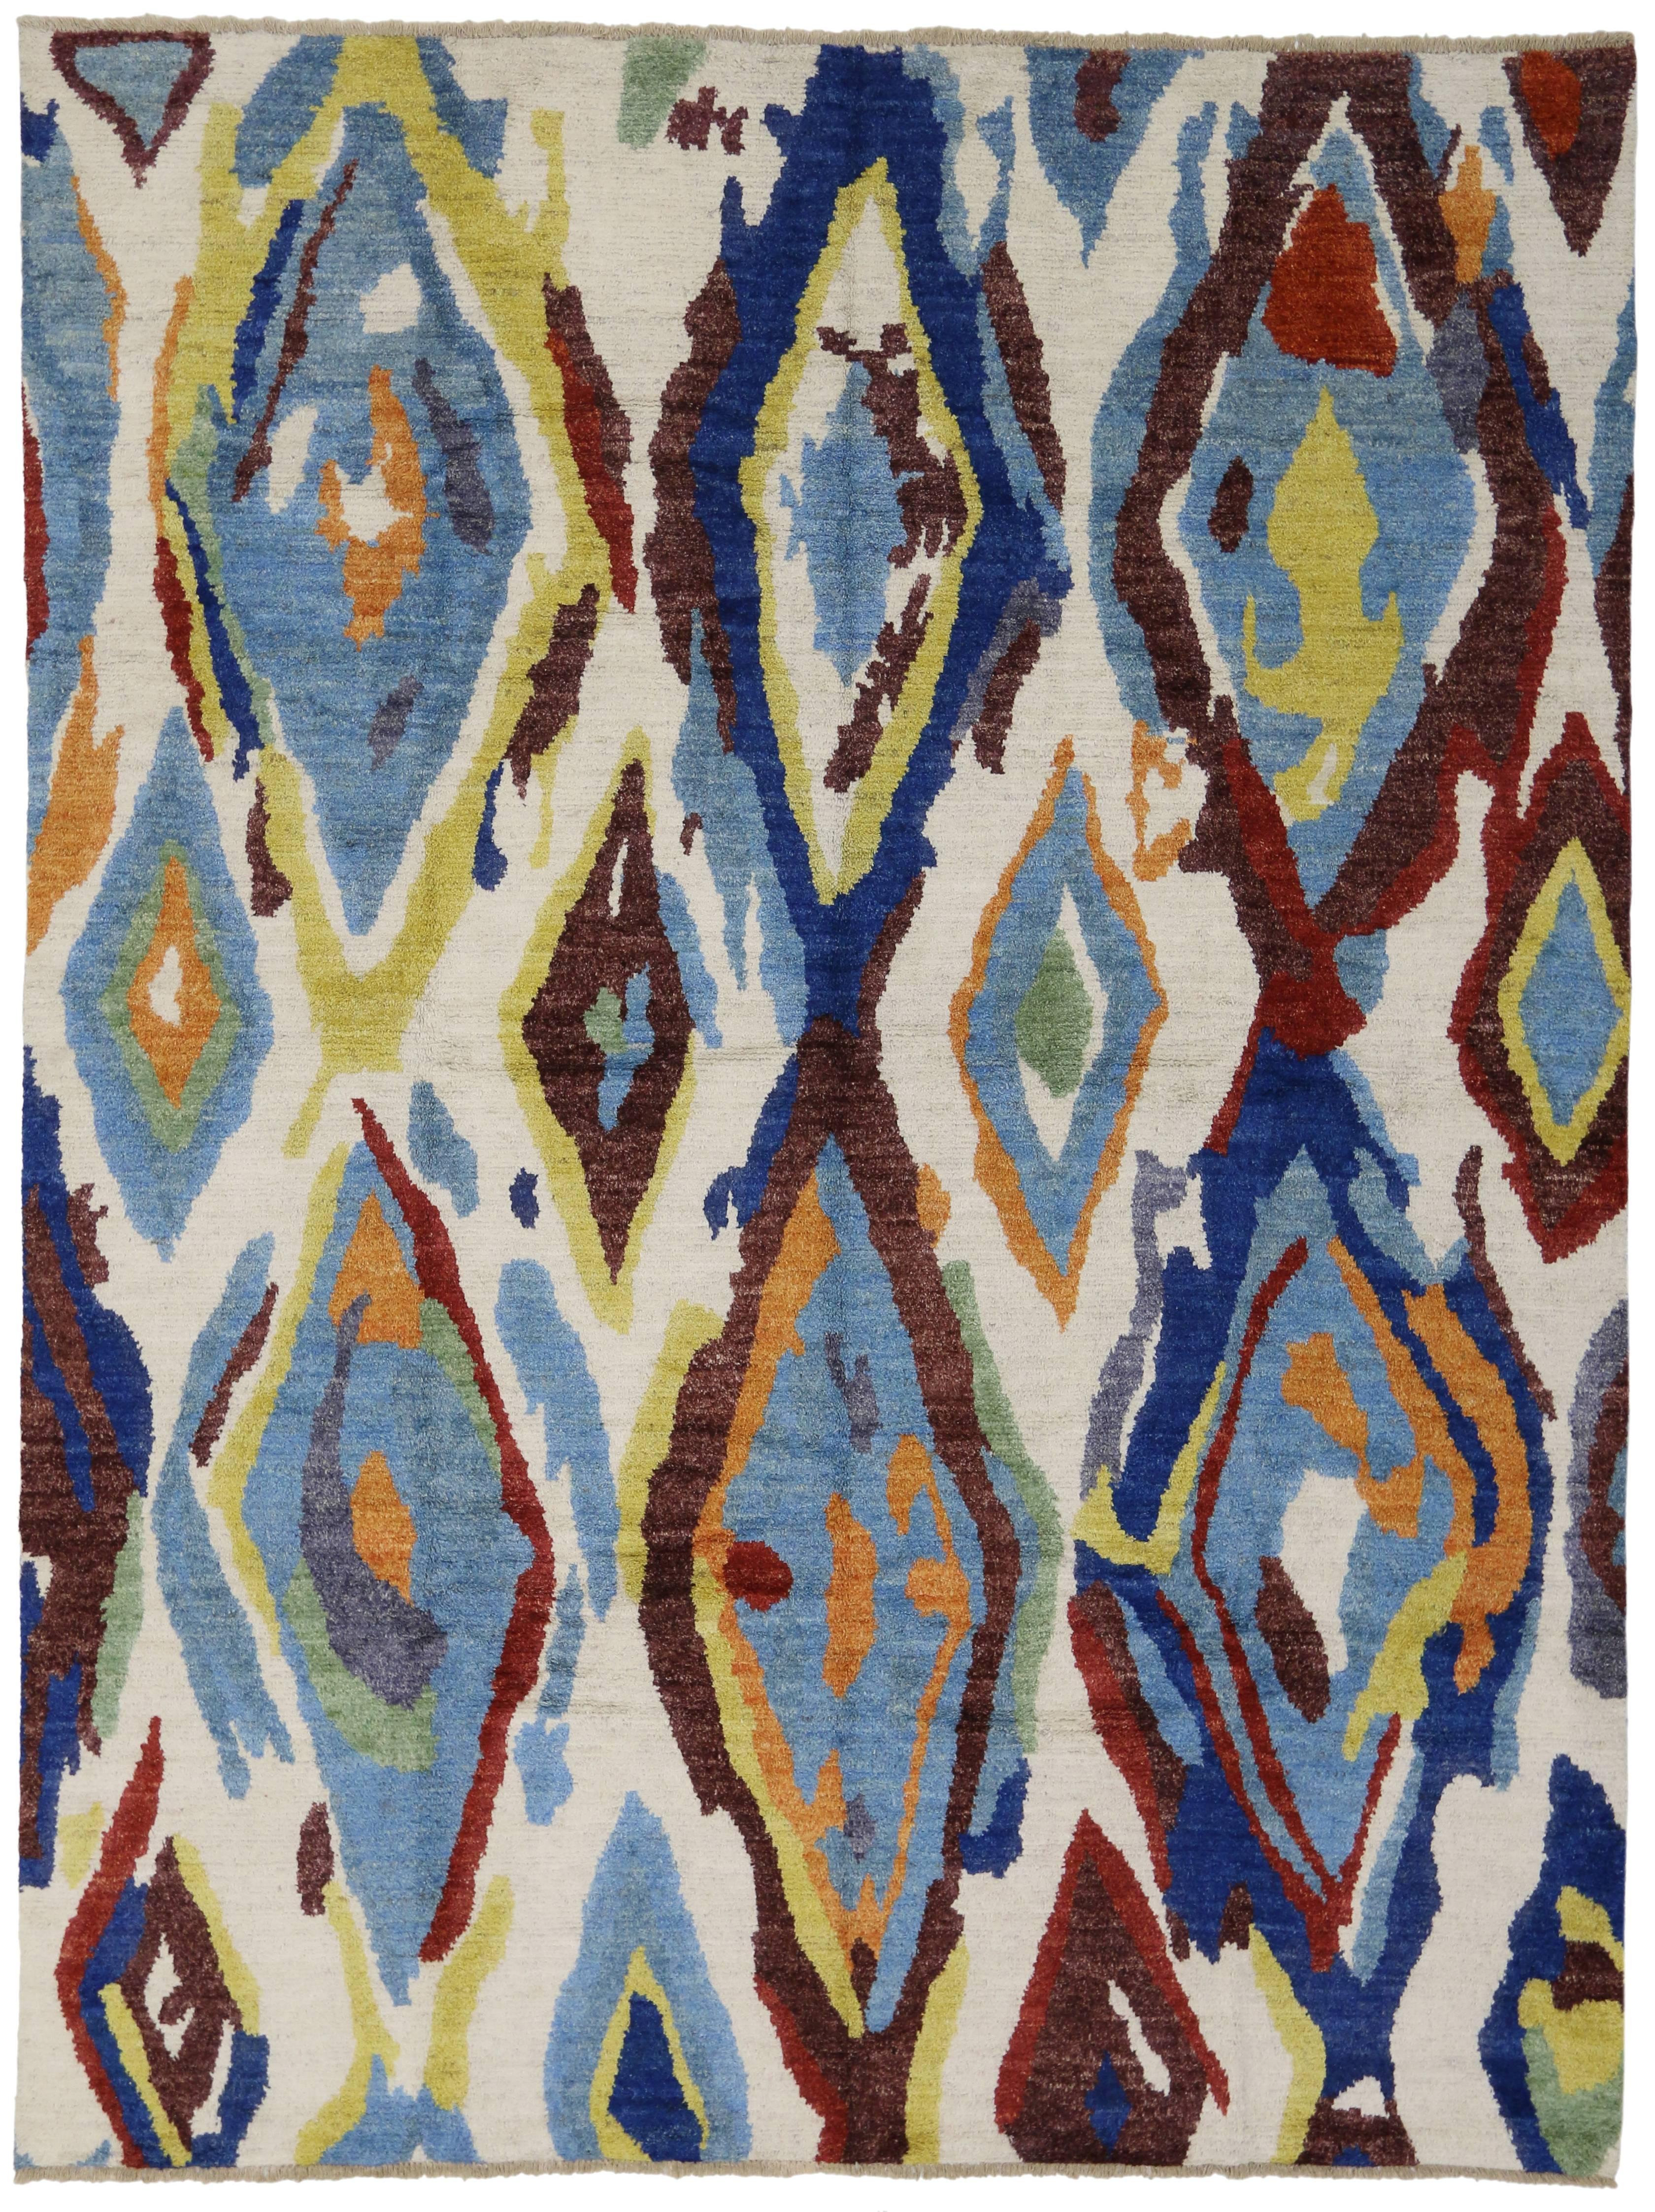 New Colorful Contemporary Moroccan Area Rug with Postmodern Memphis Style 4